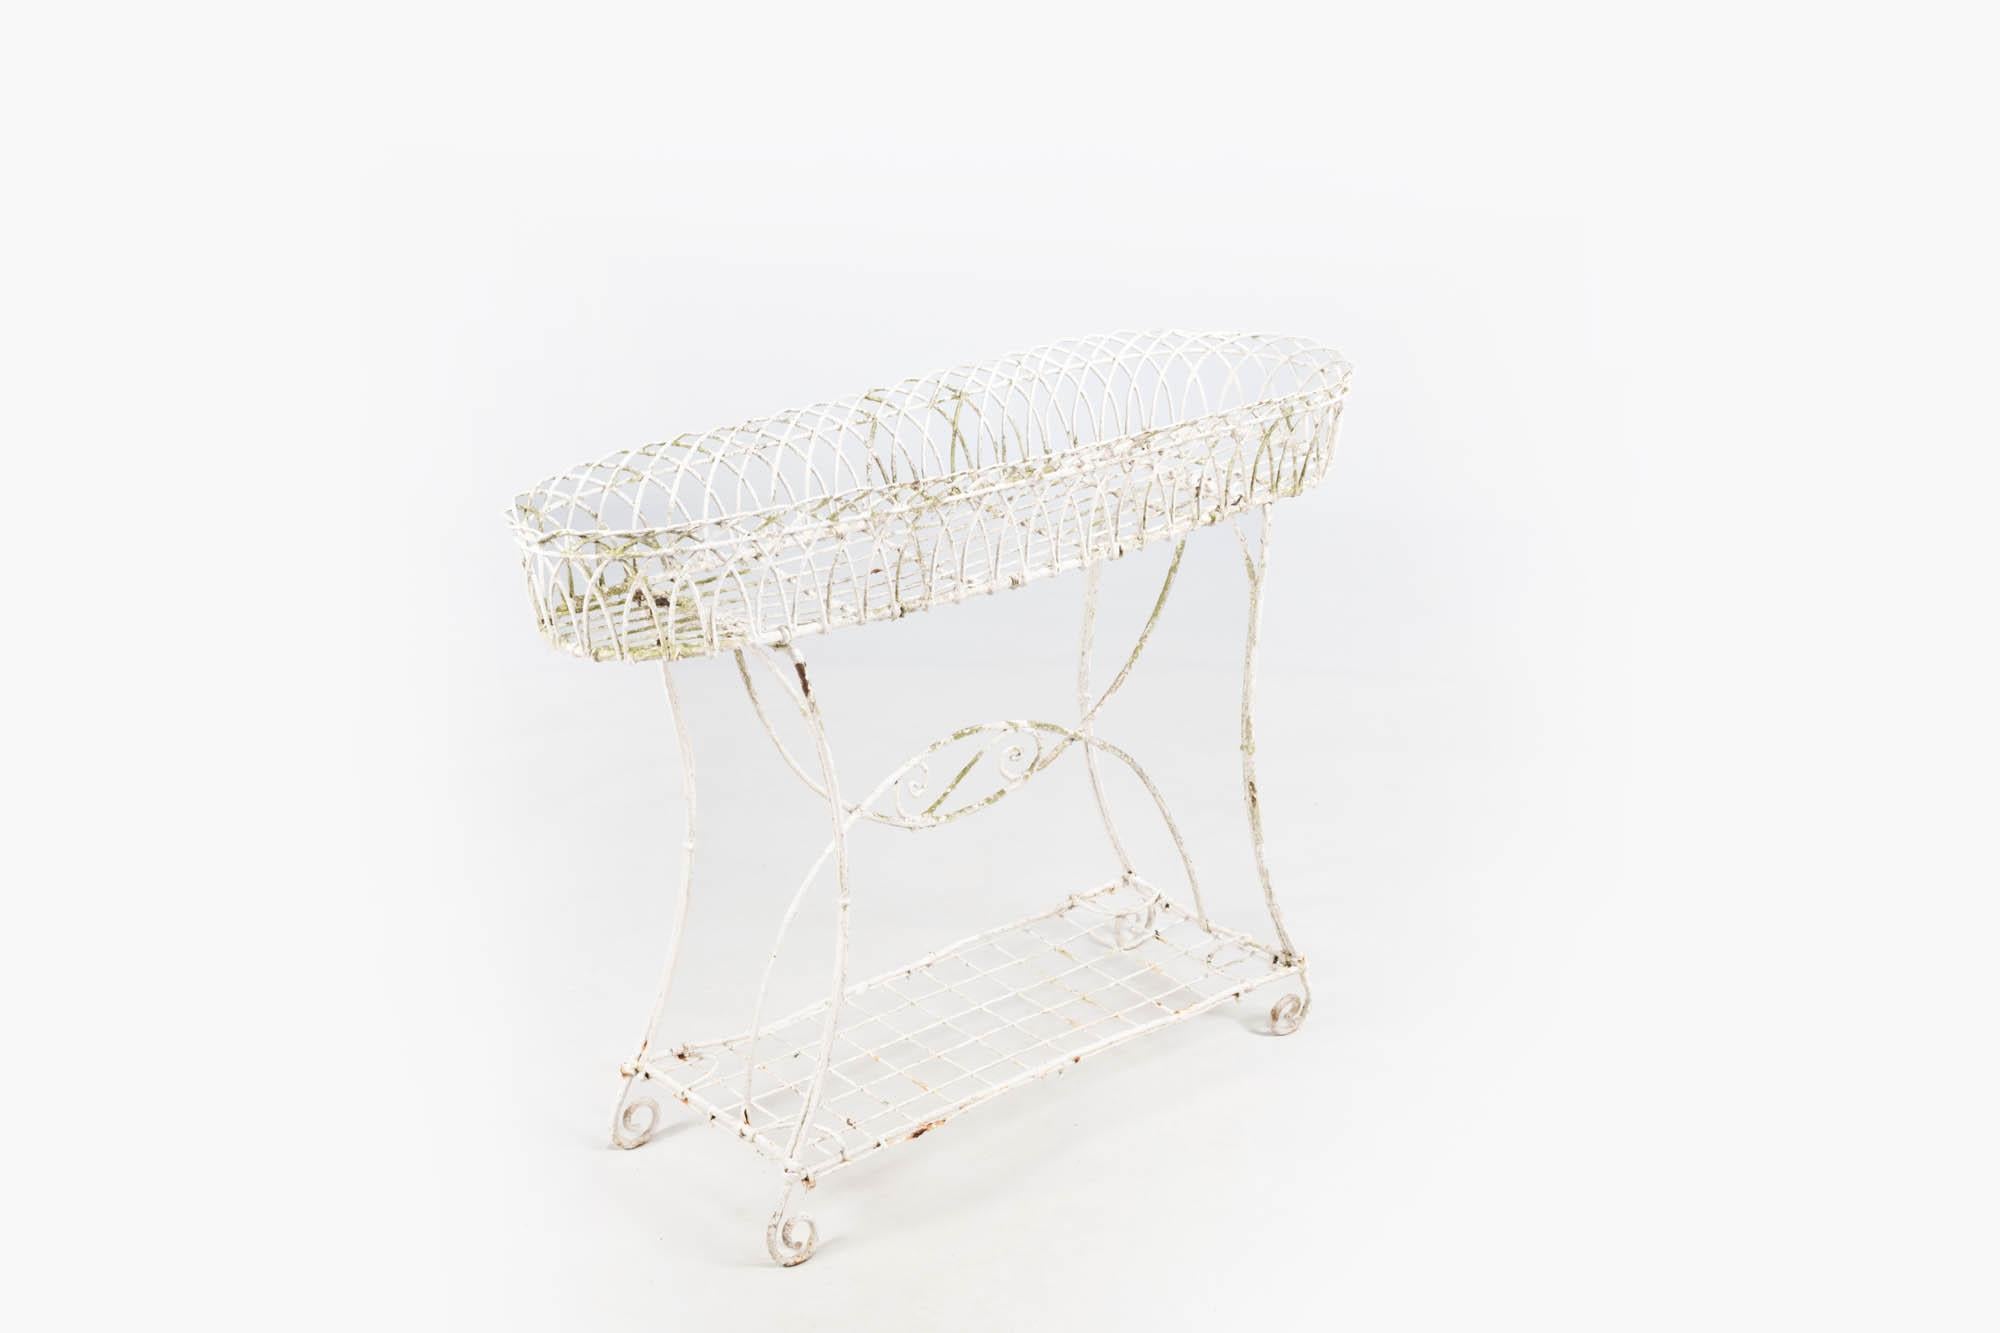 19th Century white painted metal wirework plant stand featuring galleried basket top and scrolled feet. Pieces such as this were favoured in Victorian garden rooms and conservatories to display flowering pot plants. Traditionally produced in